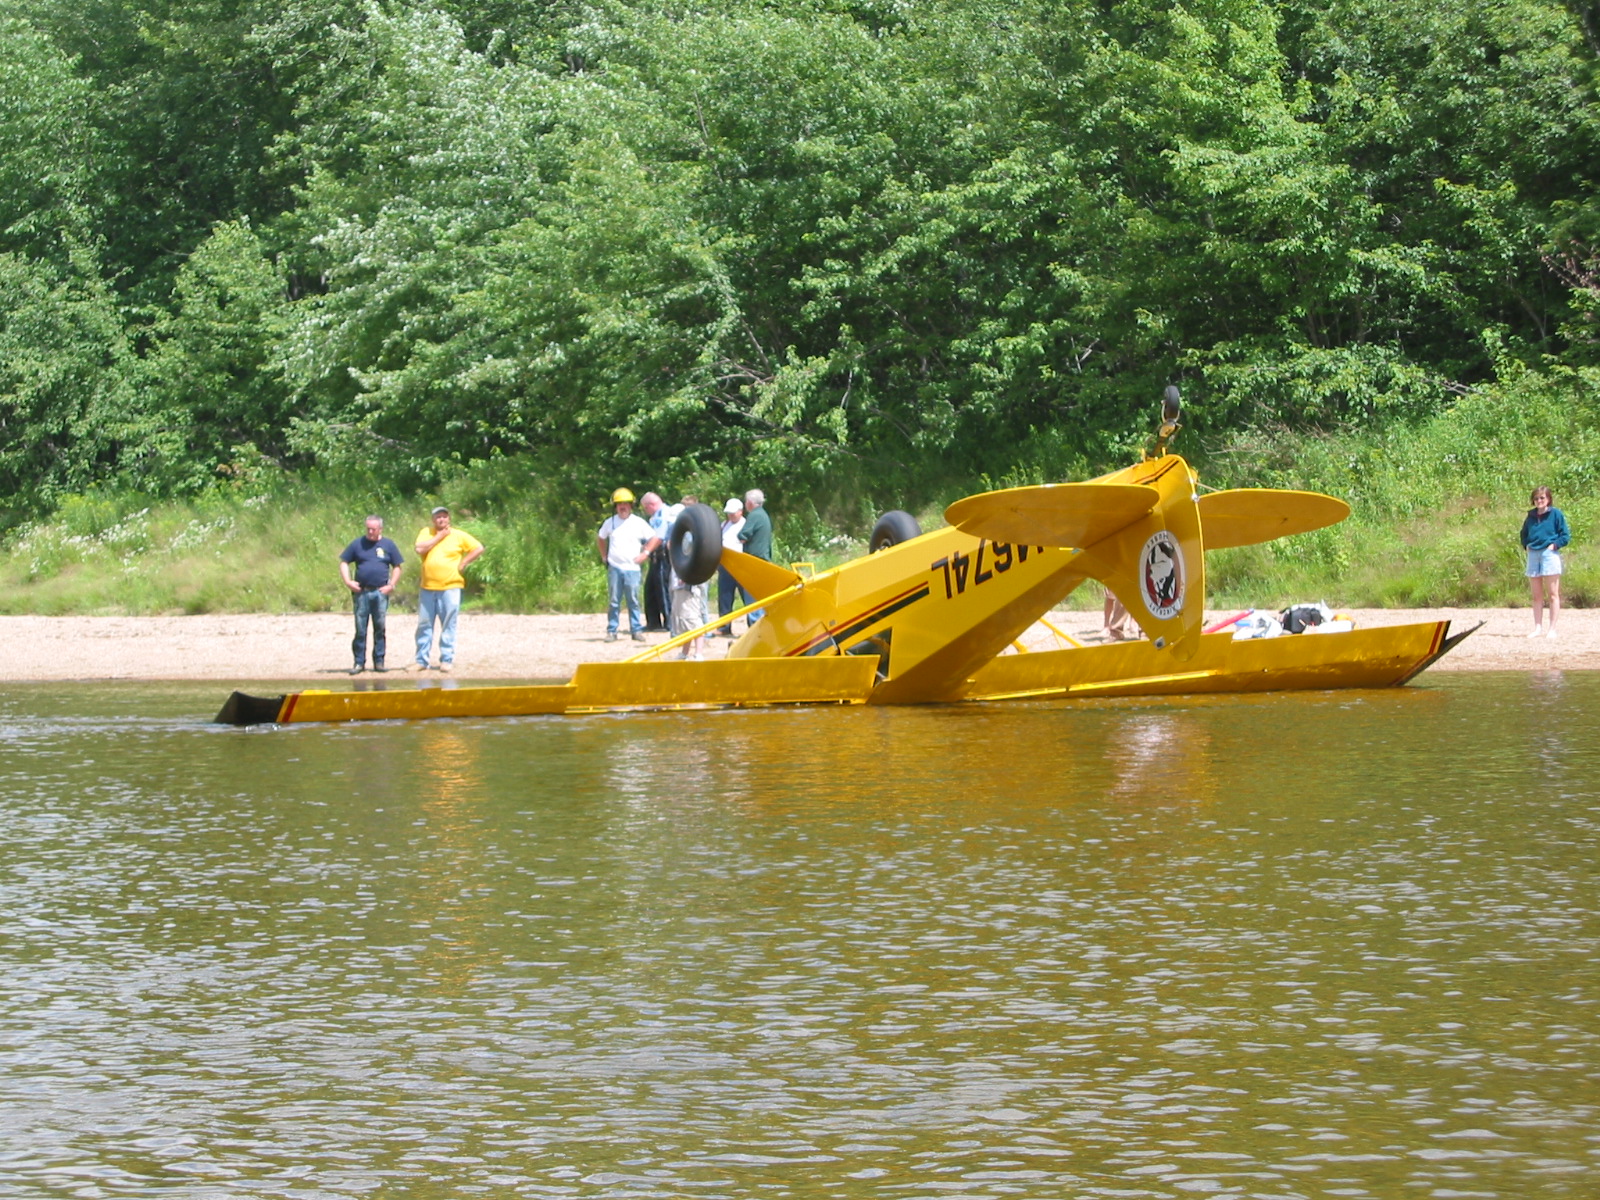 Piper Cub Had Engine Problems And Tried To Land On The Beach